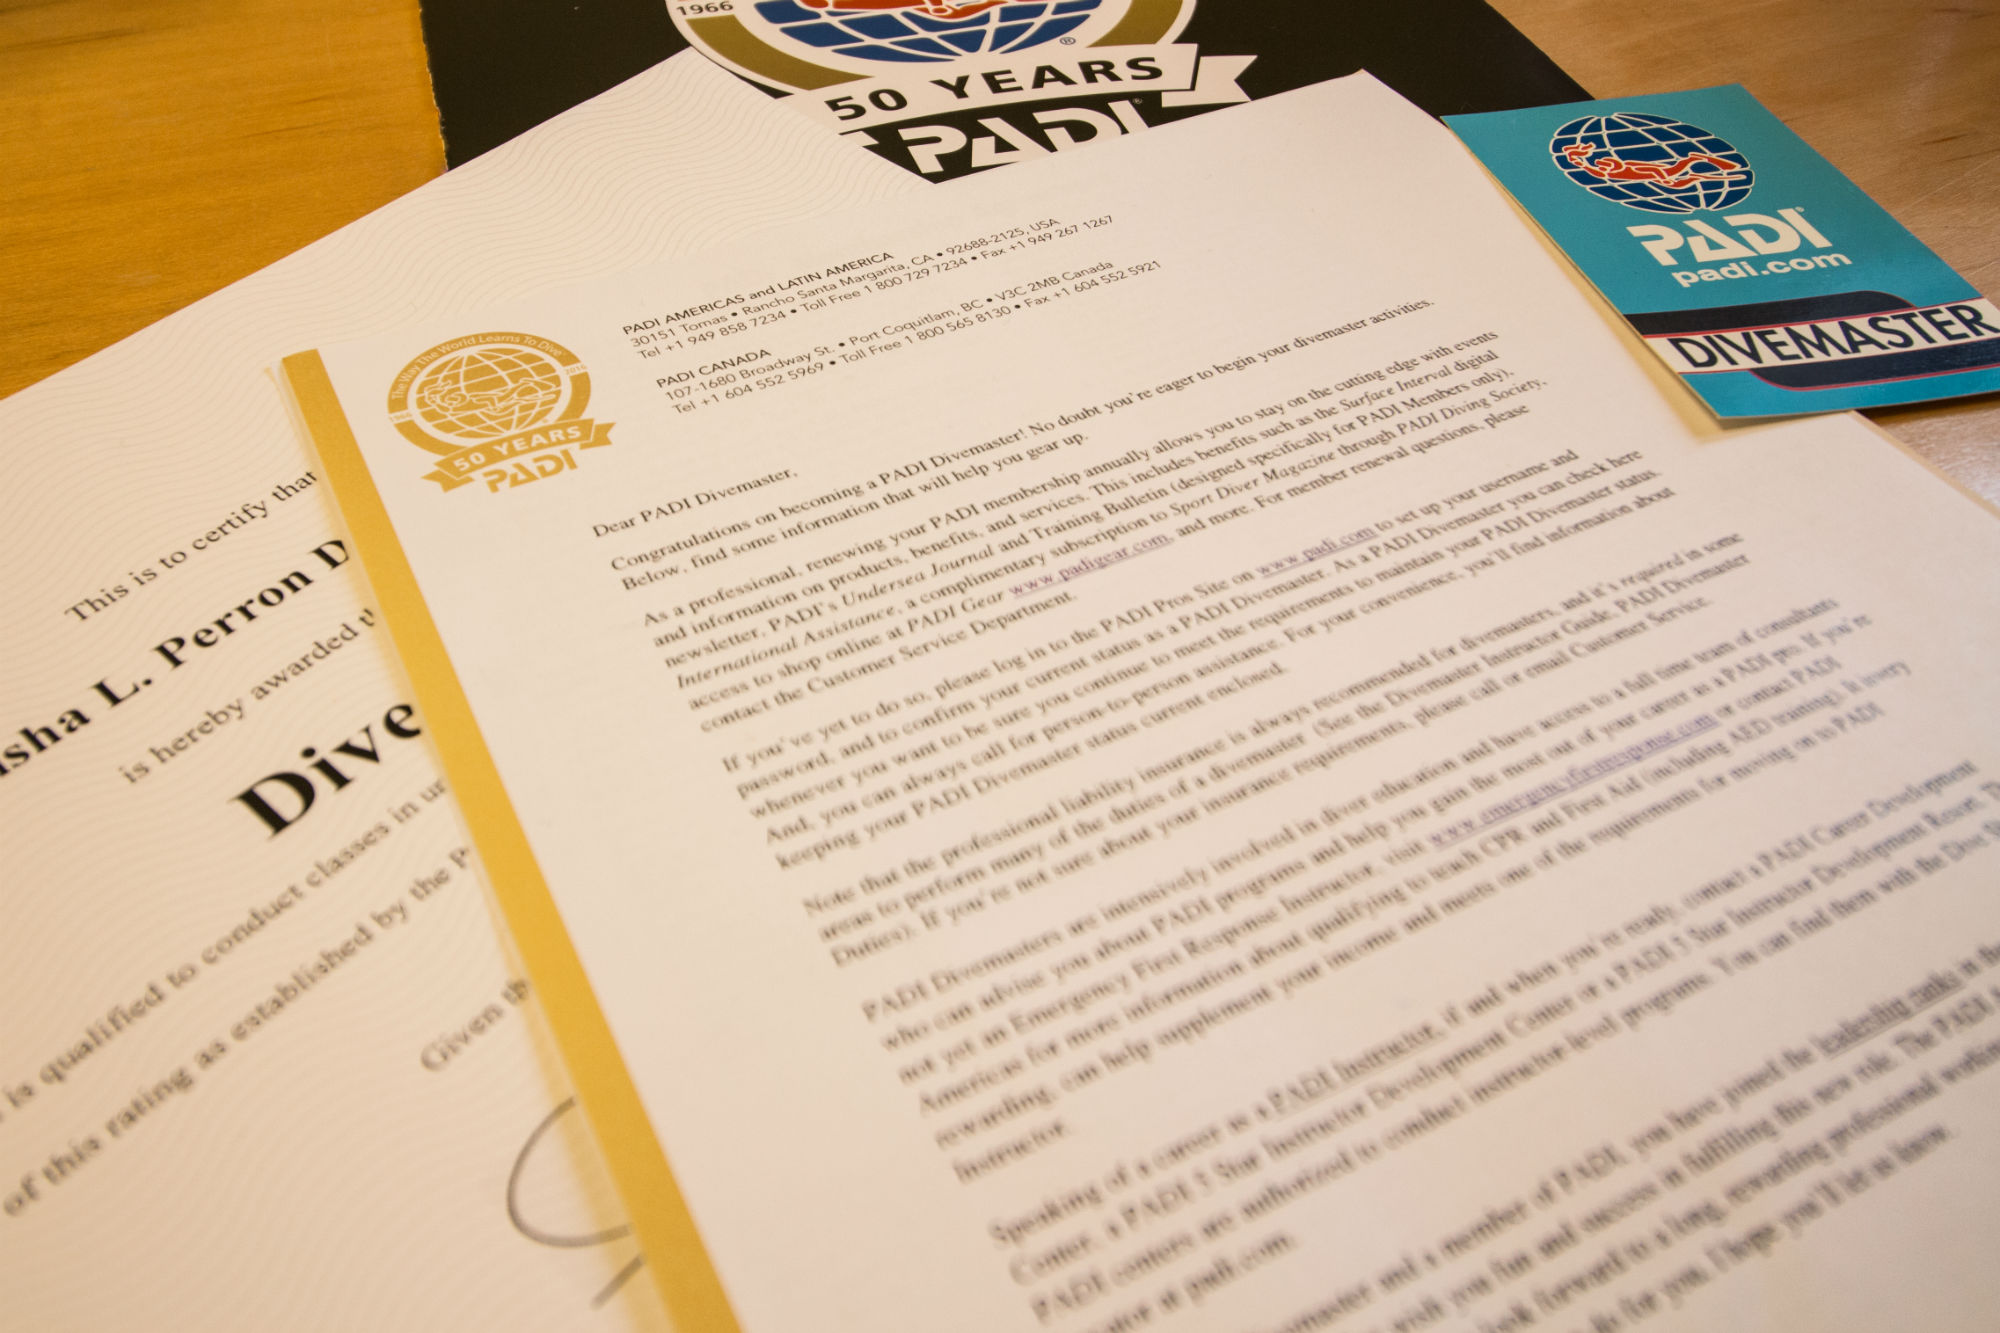 Divemaster Certificate and Letter from PADI